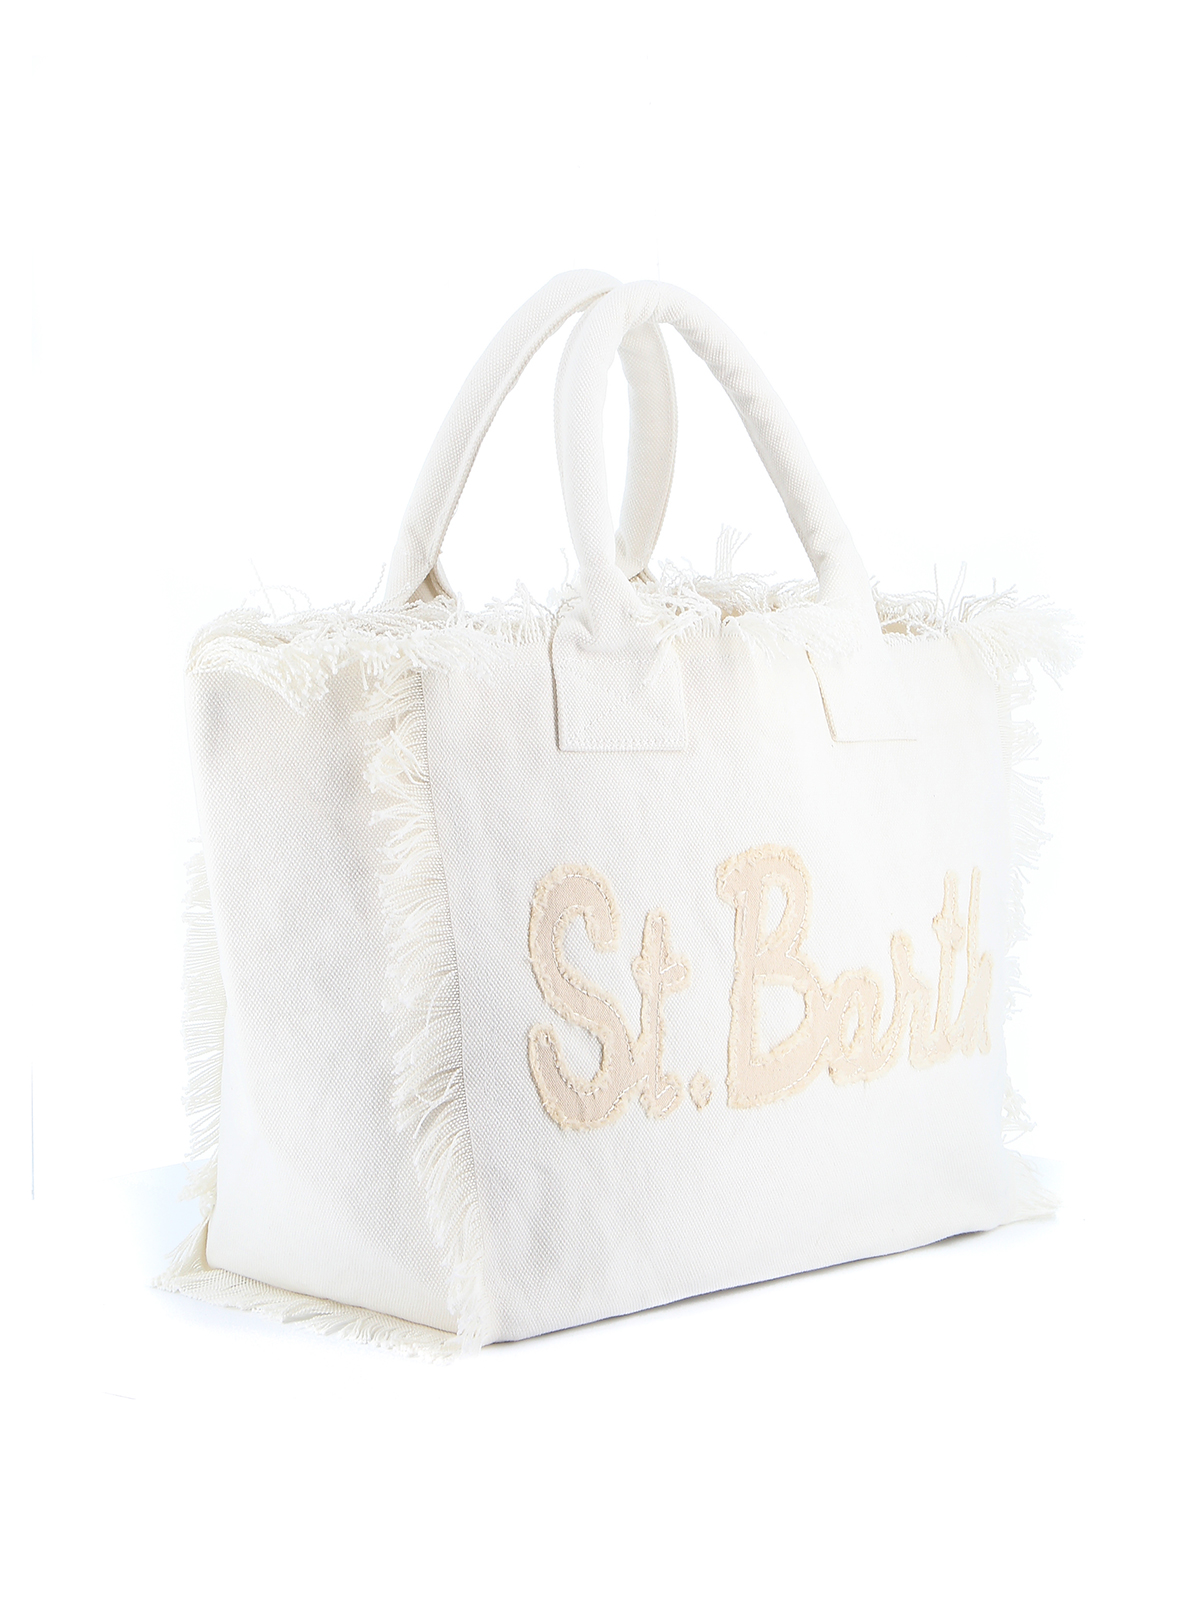 MC2 Saint Barth Vanity Canvas Shoulder Bag With White And Beige